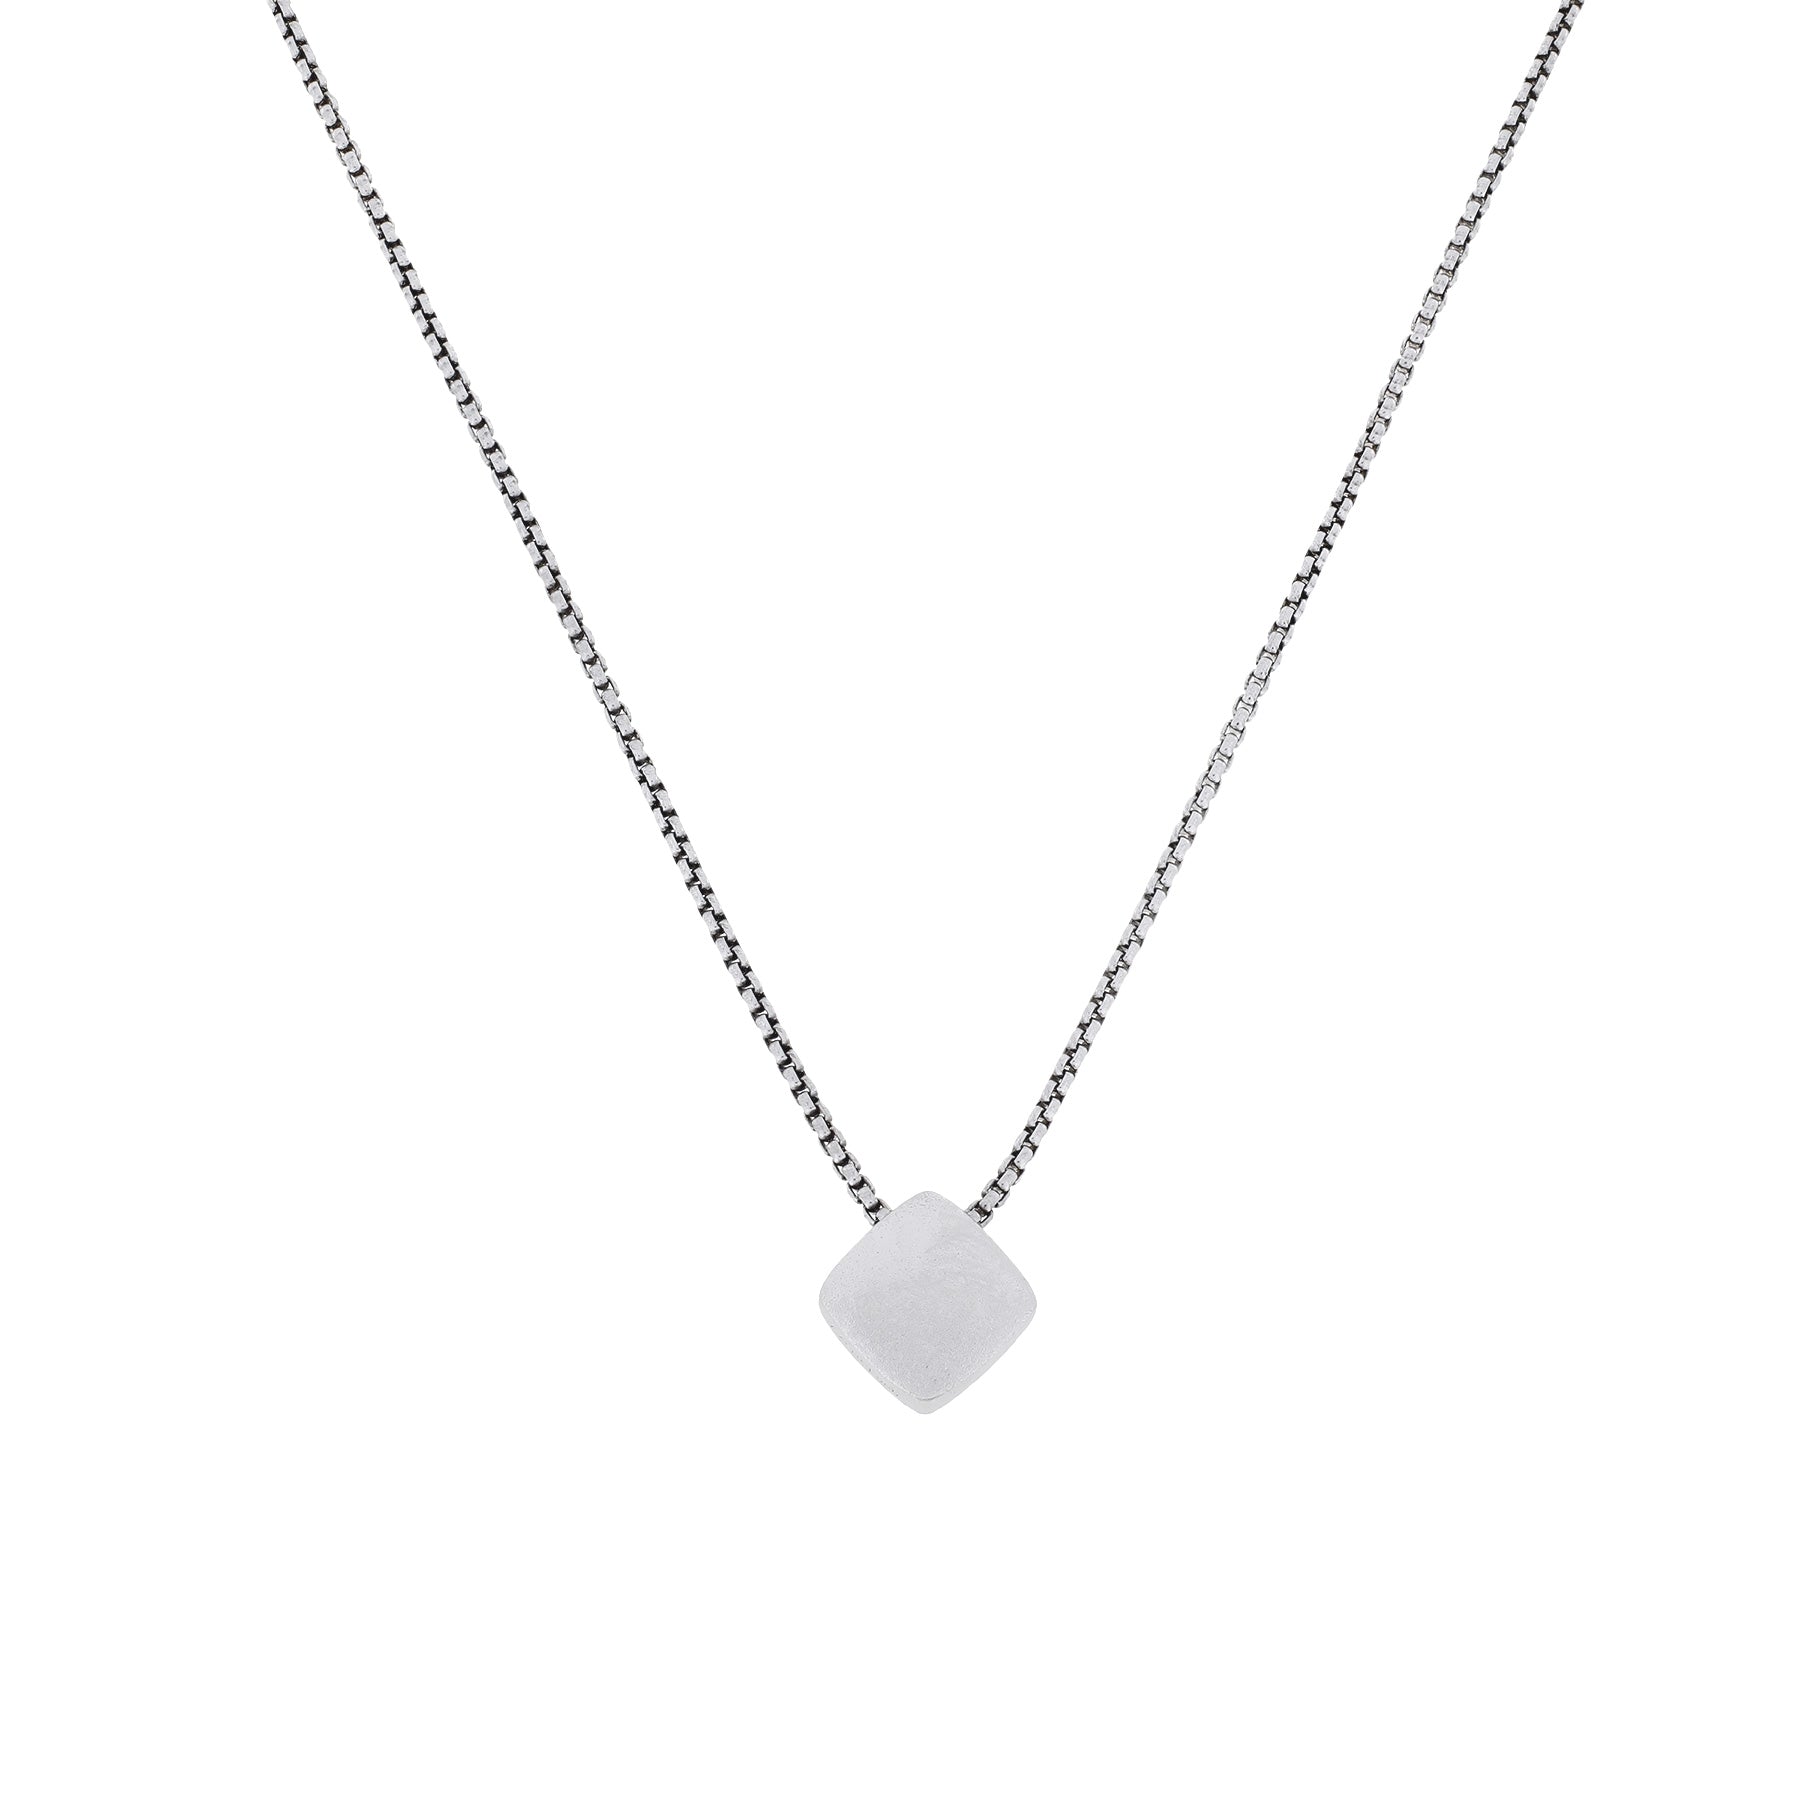 EMBRACE SILVER RHOMBUS NECKLACE